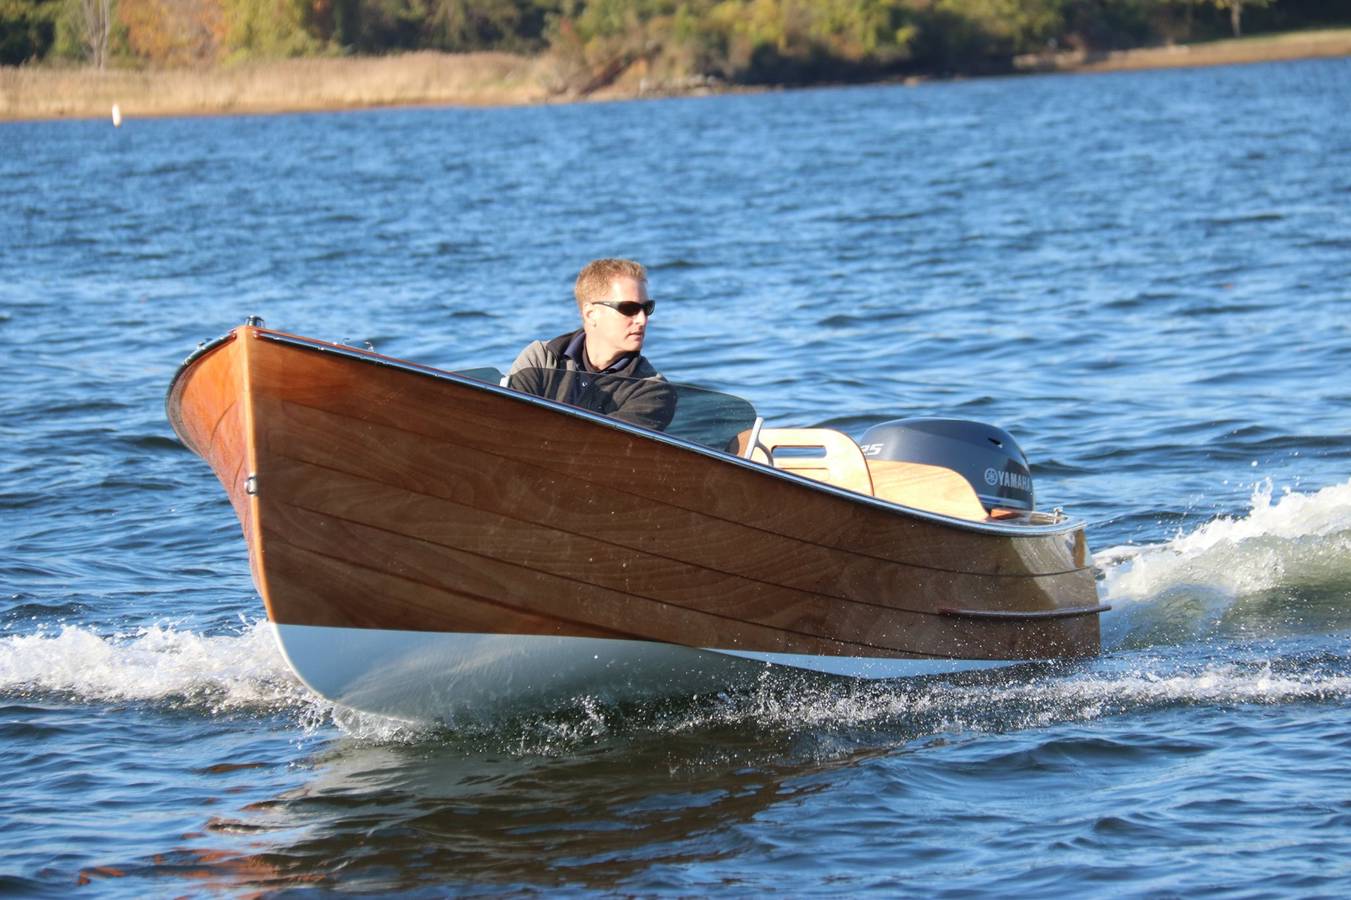 Rhode Runner - a modern kit-built wooden motorboat in the style of a classic 1950s runabout